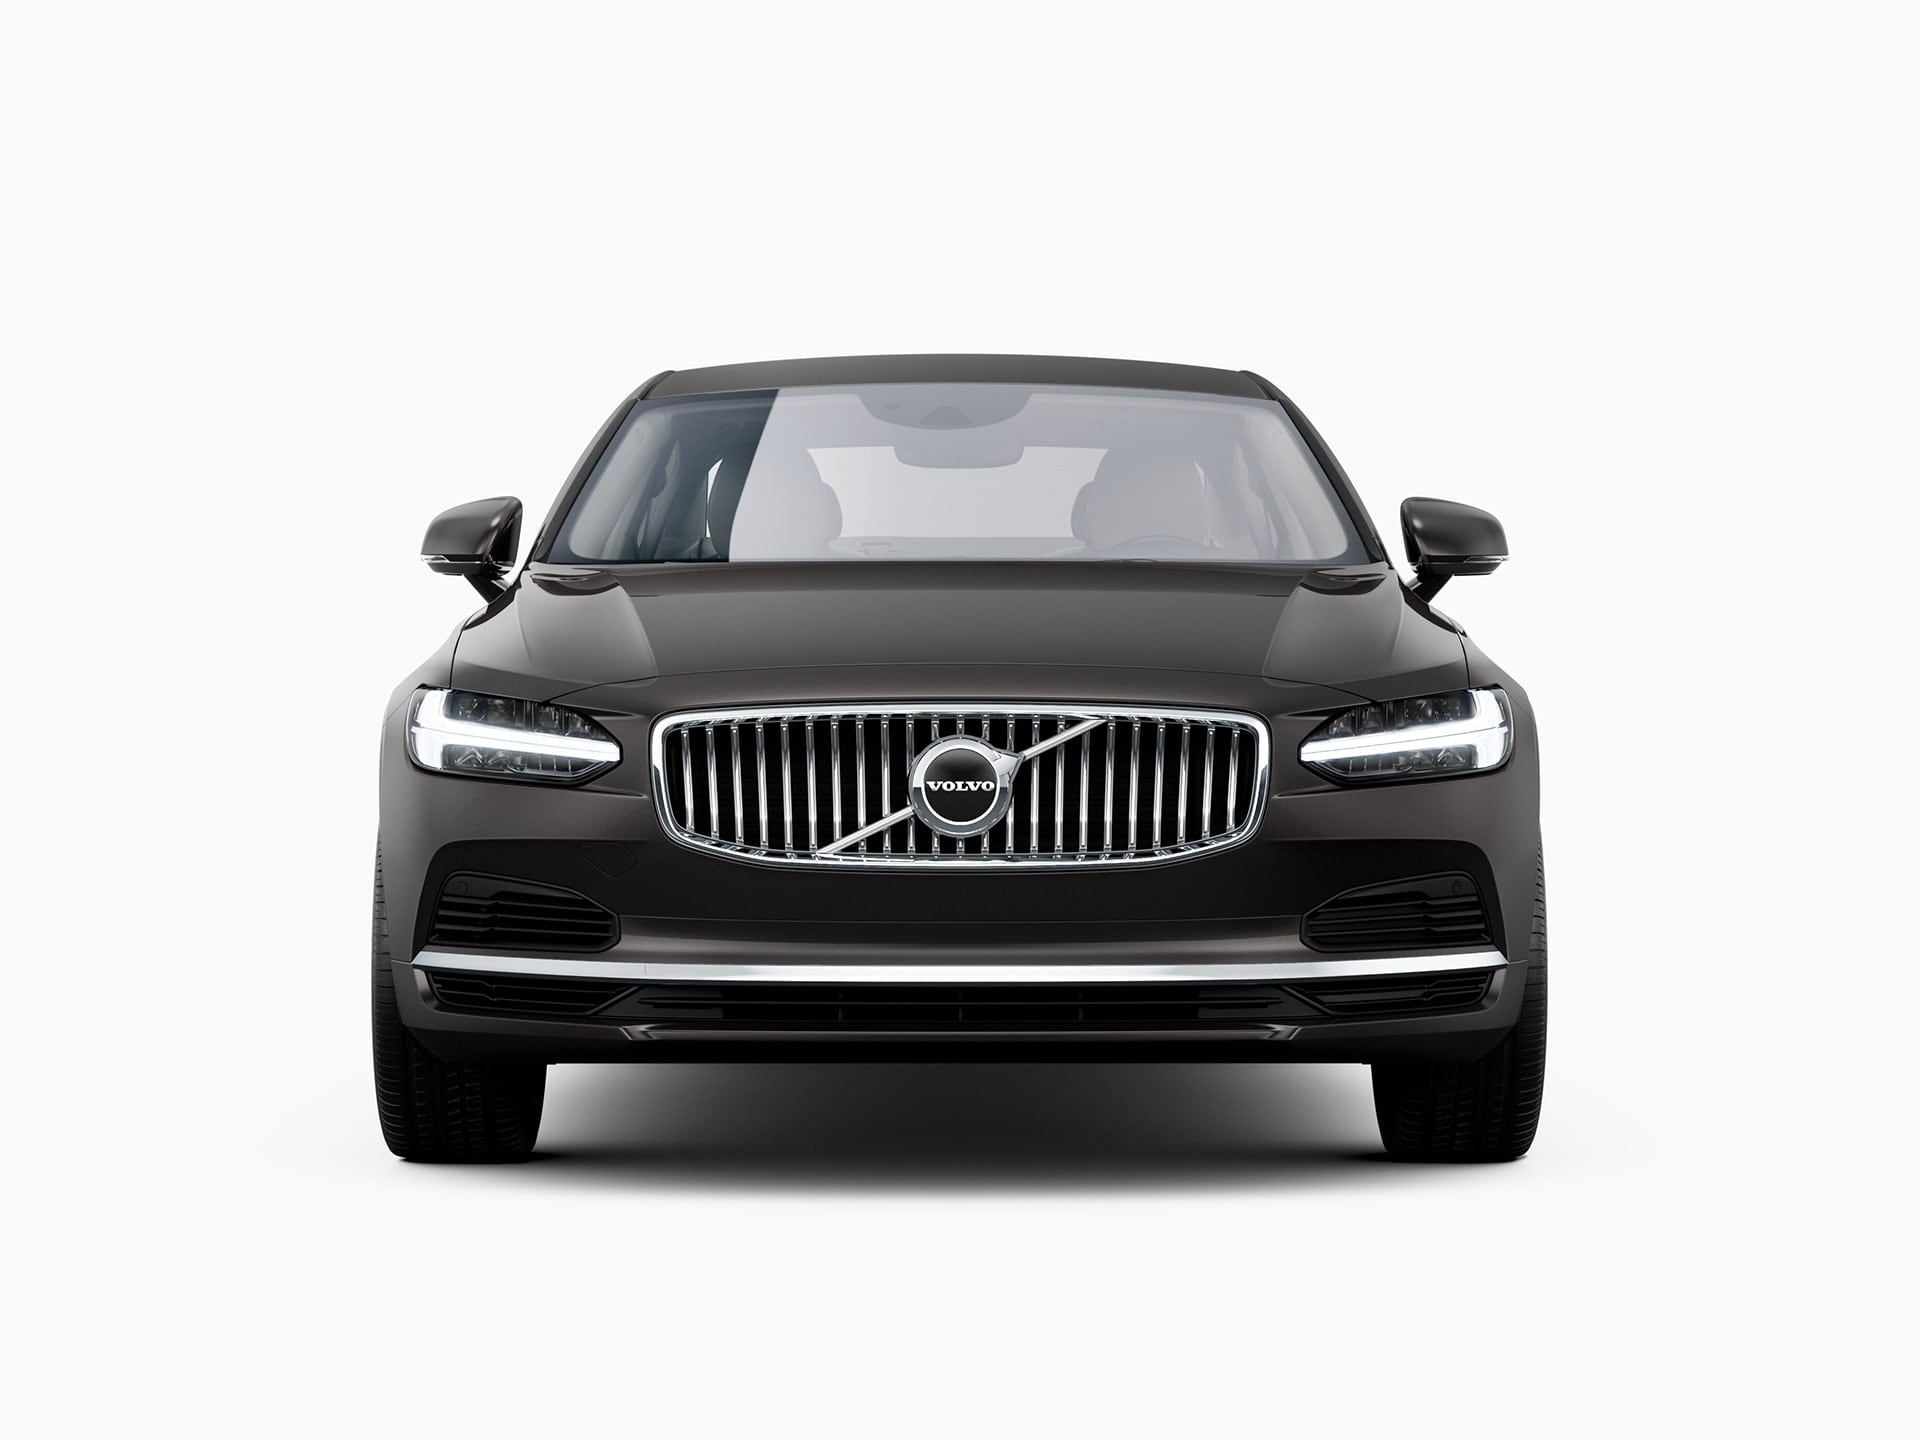 The front of a Volvo S90 Recharge plug-in hybrid sedan.